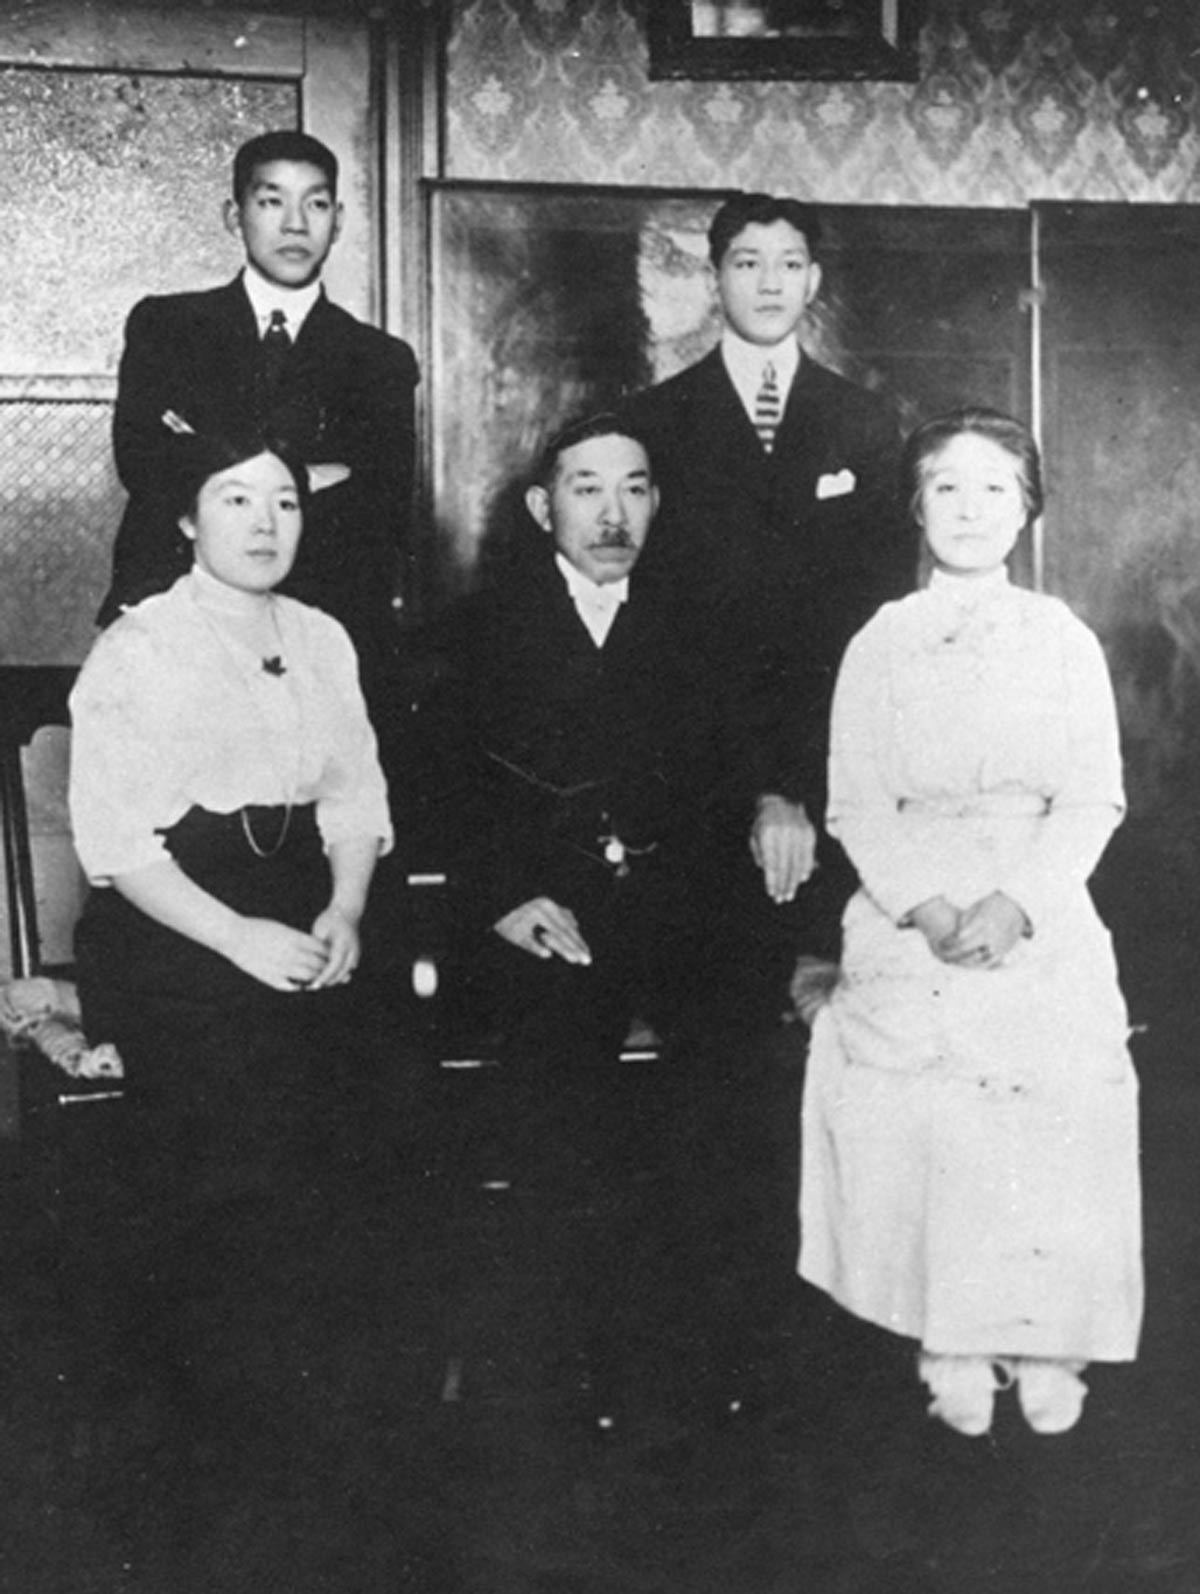 Posed family portrait of Manzo Nagano with his wife and family.